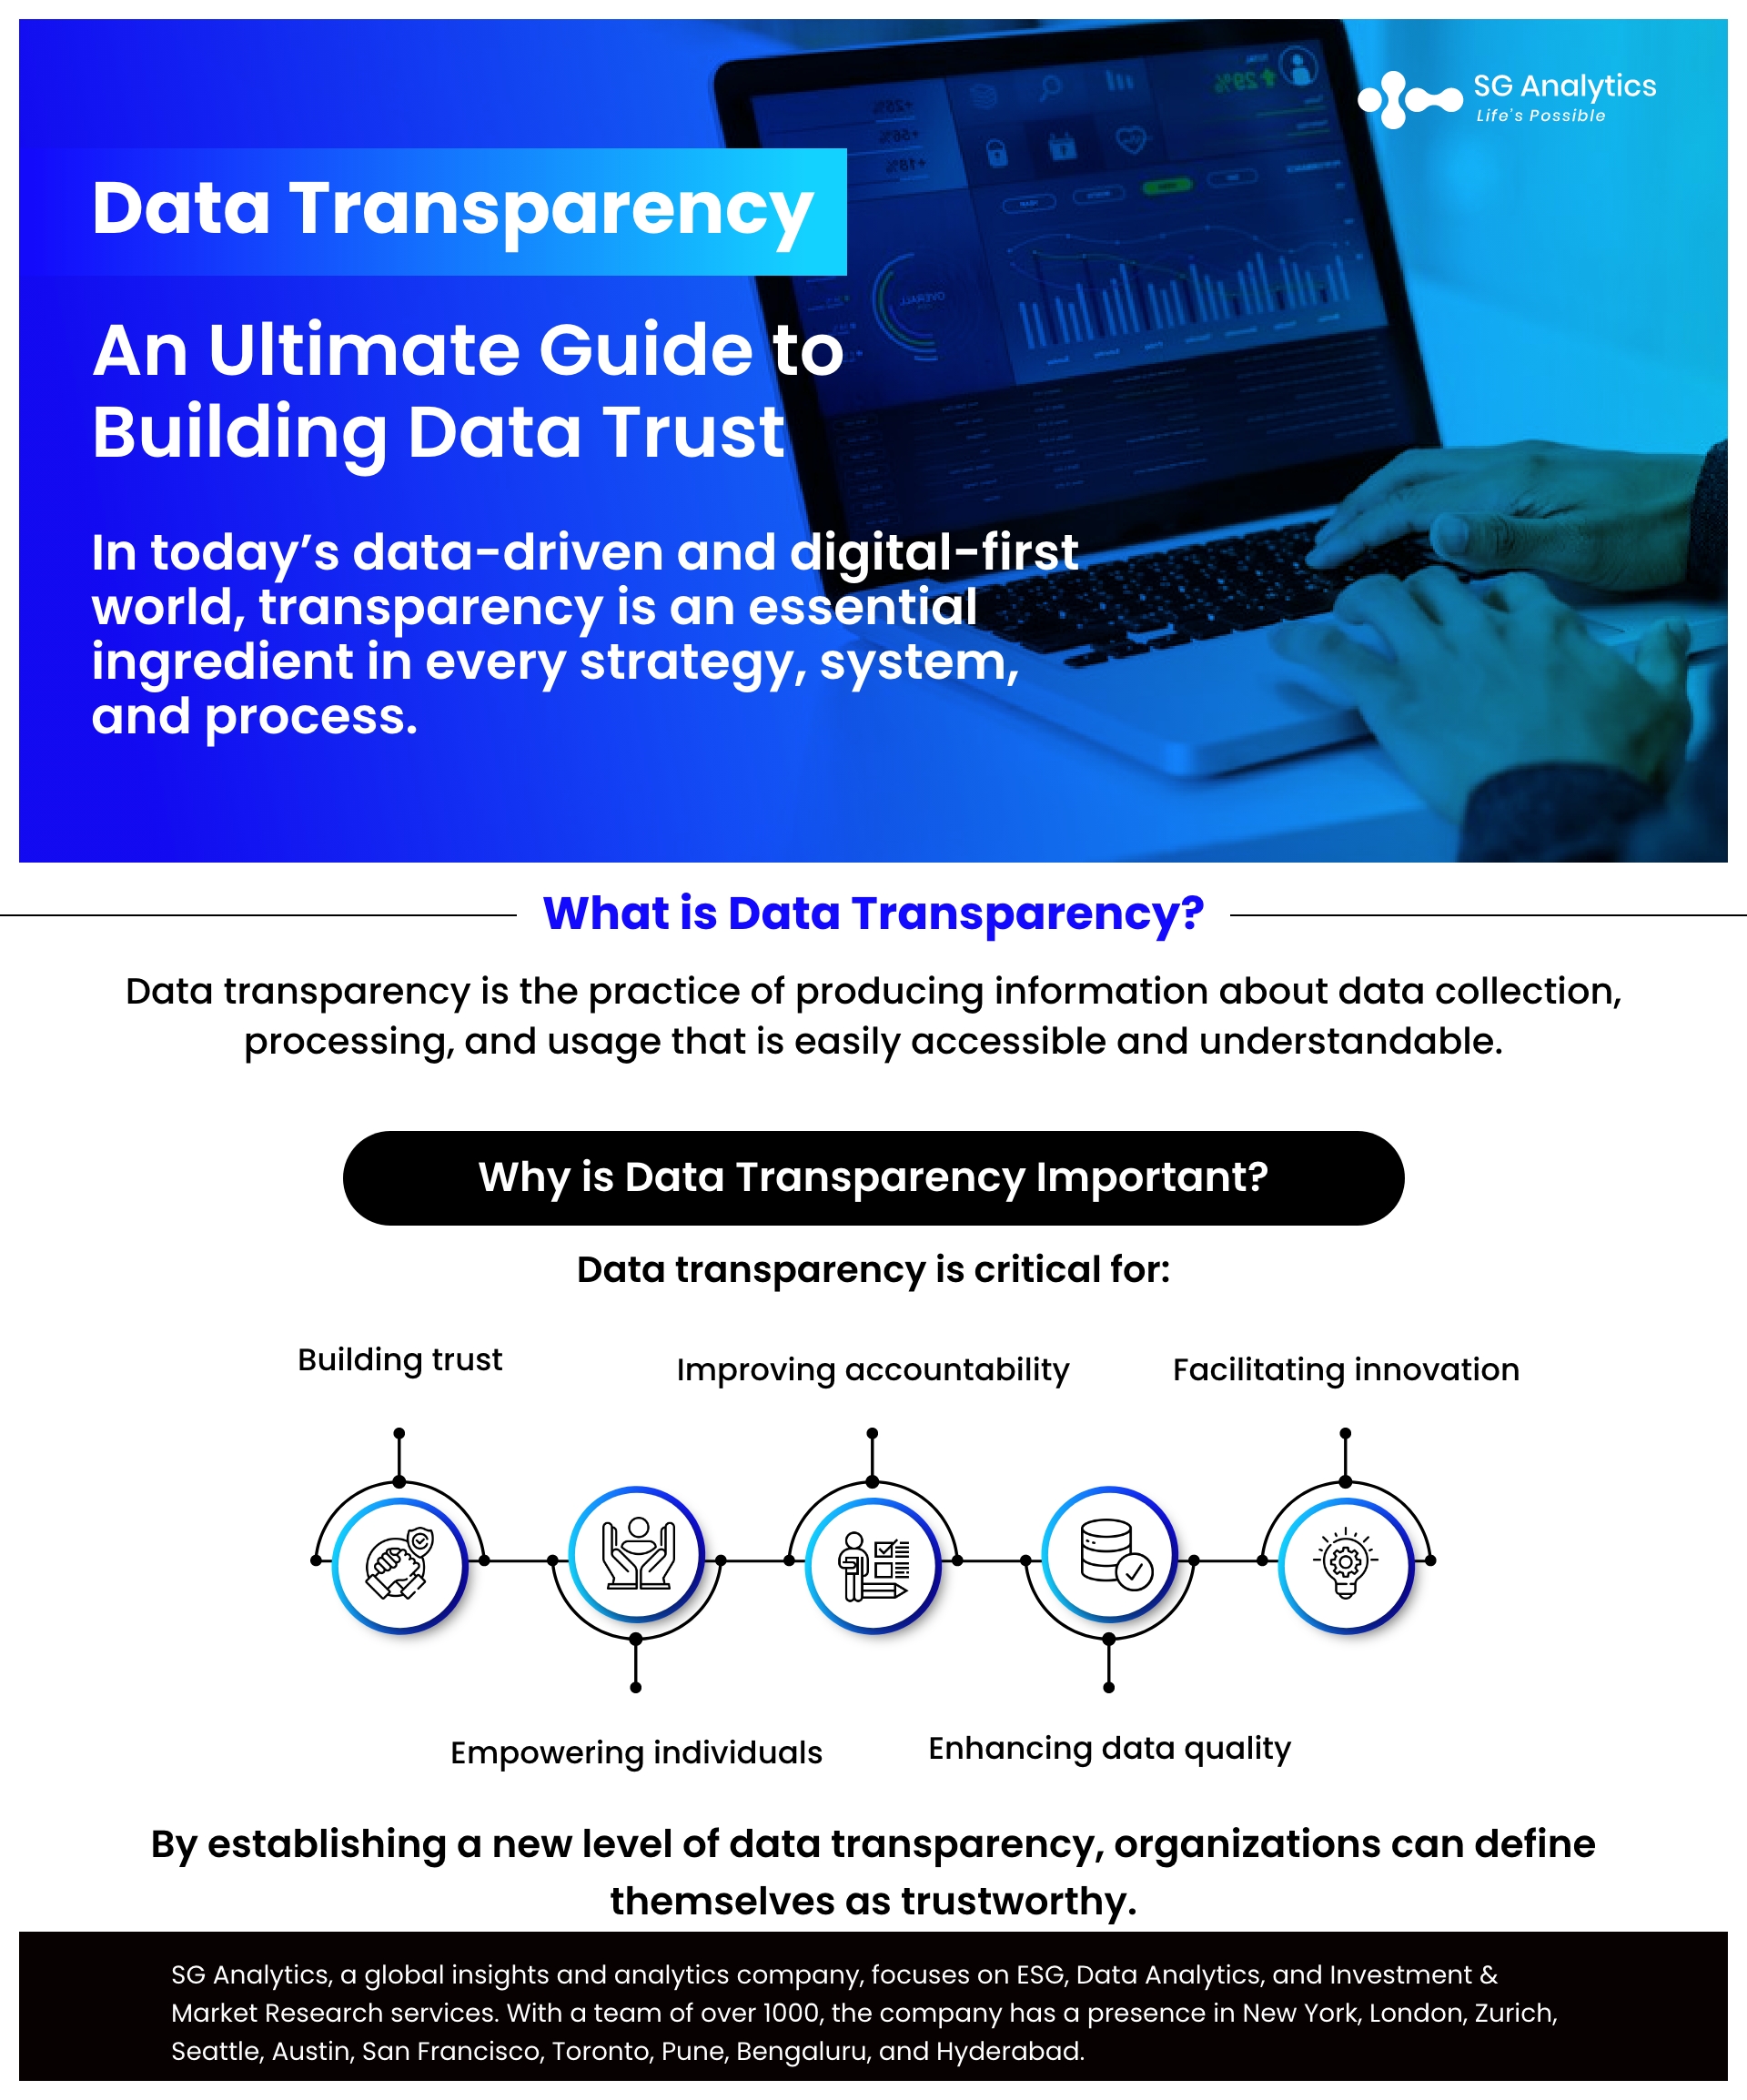 Data Transparency - An Ultimate Guide to Building Data Trust